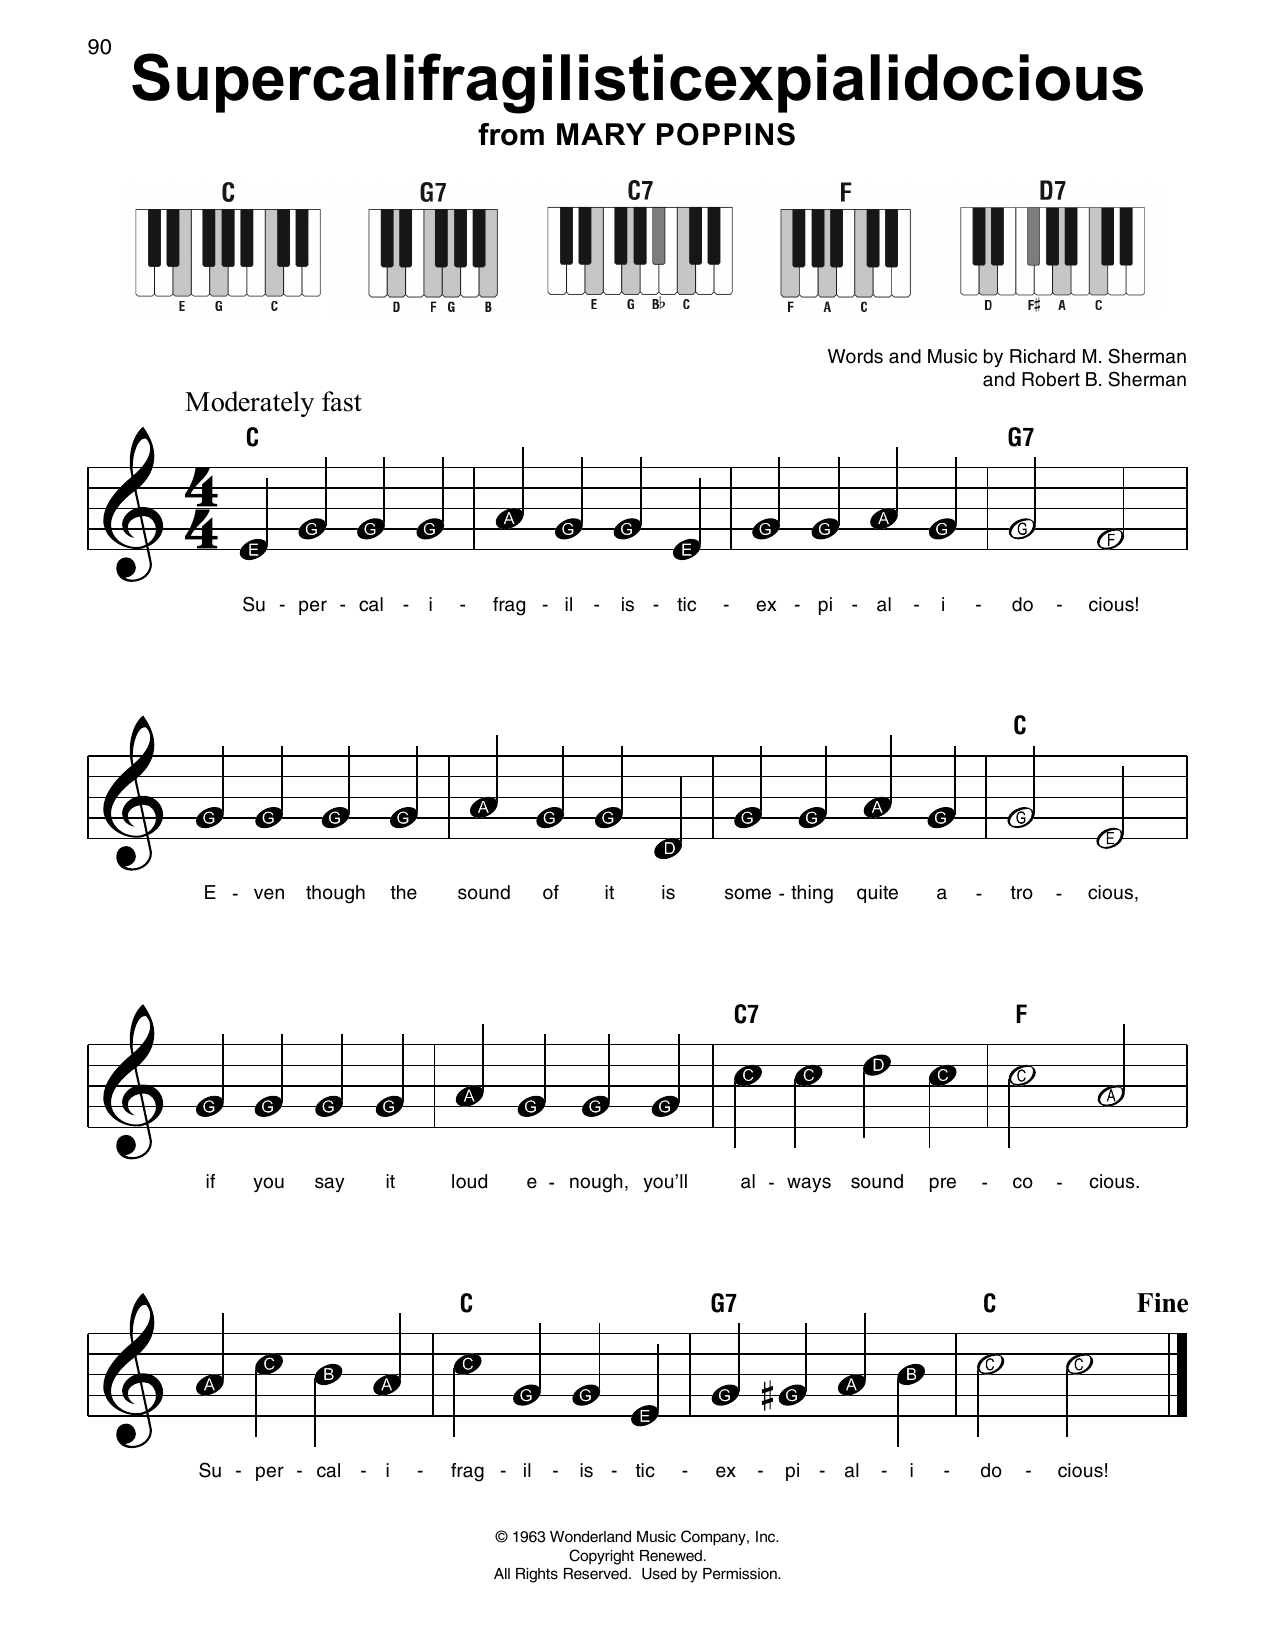 Robert B. Sherman Supercalifragilisticexpialidocious (from Mary Poppins) sheet music notes and chords. Download Printable PDF.